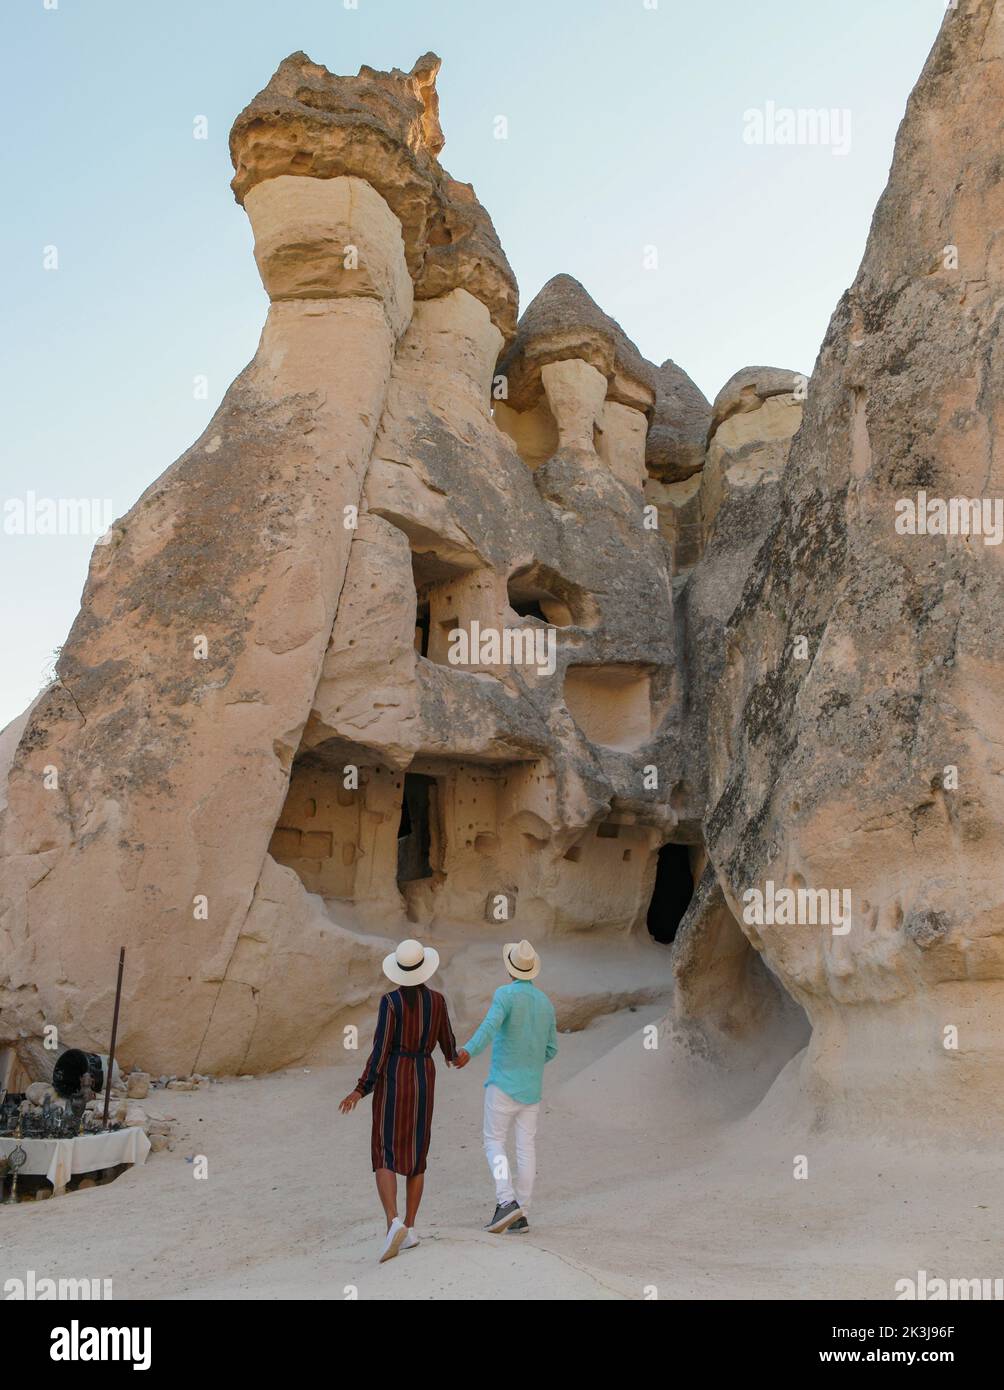 Pasabag Monks Valley happy young couple on vacation in Turkey Cappadocia, Rock Formations in Pasabag Monks Valley, Cappadocia, Turkey.  Stock Photo